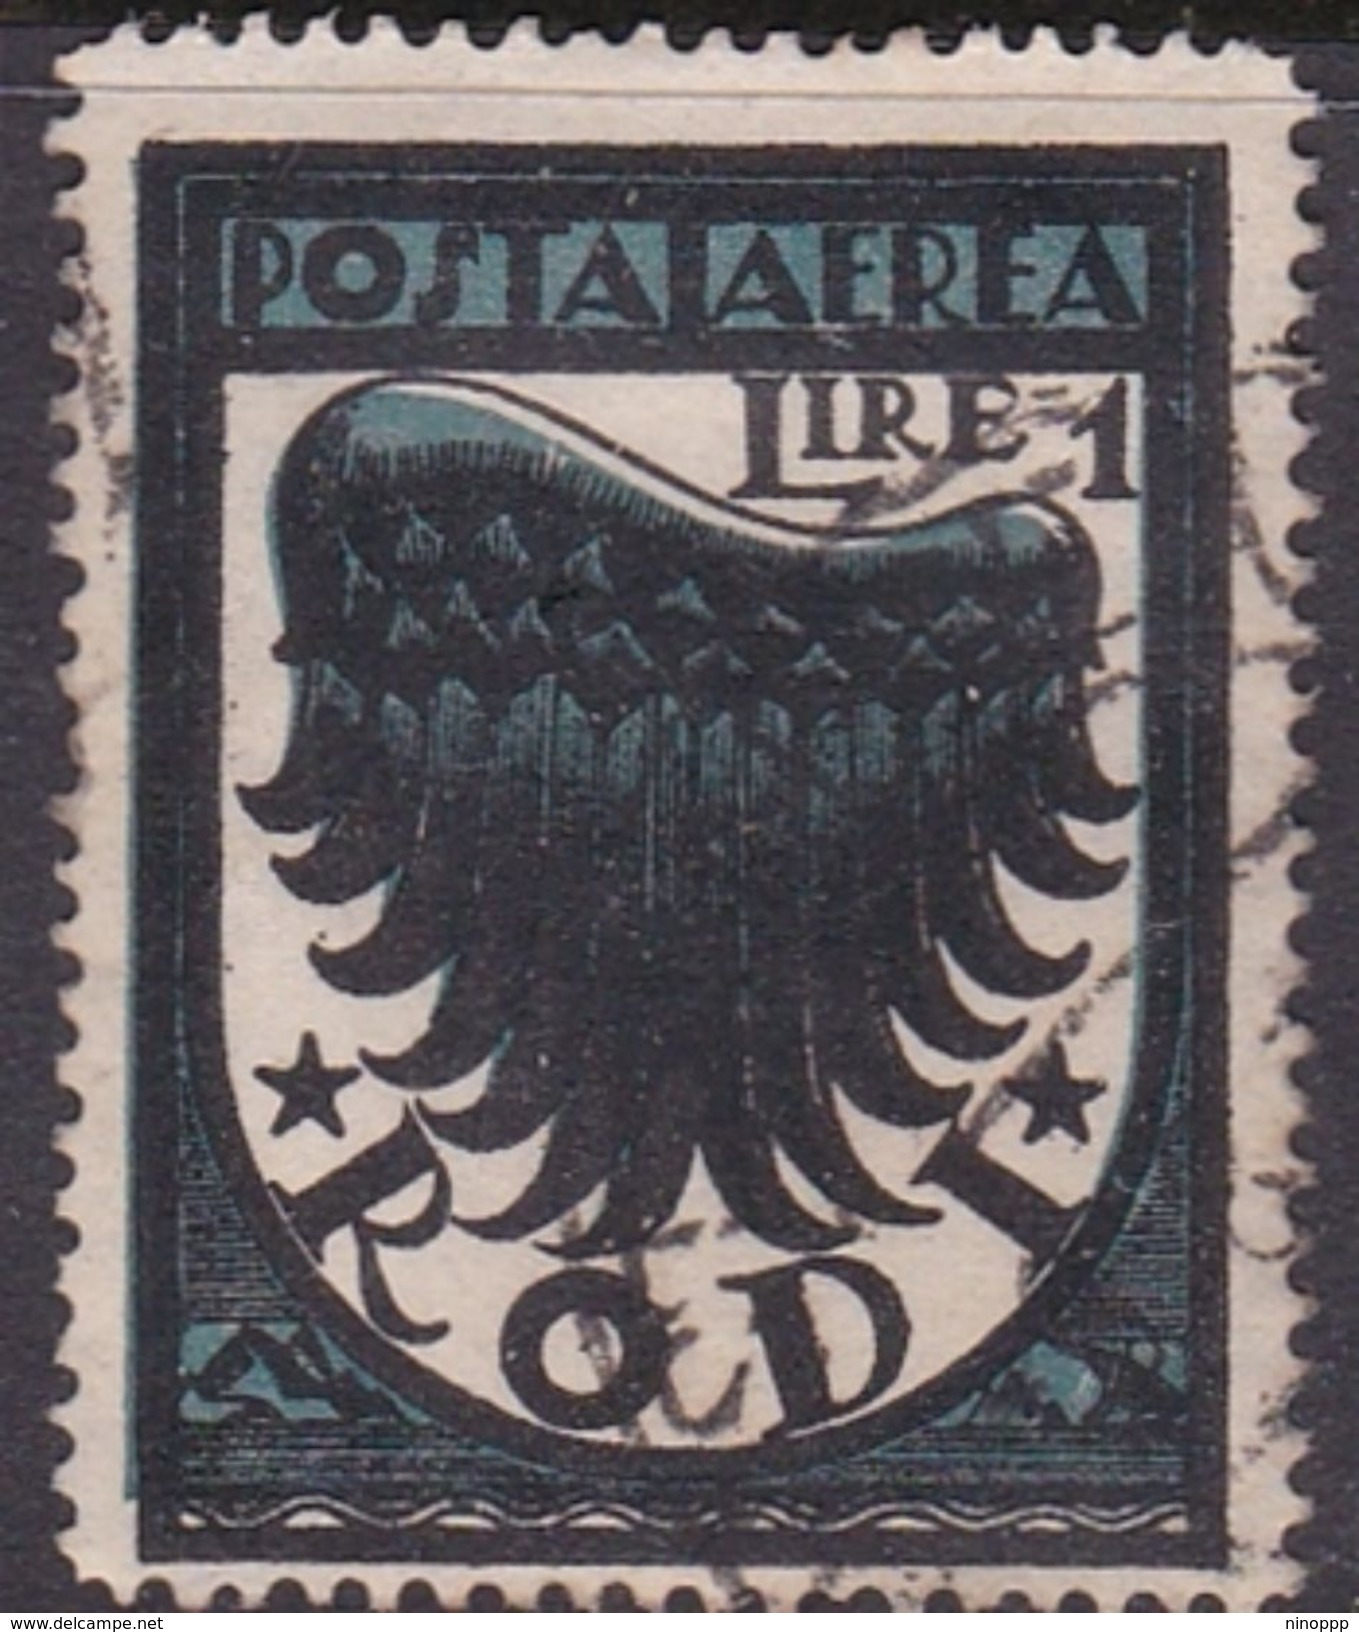 Italy-Colonies And Territories-Aegean General Issue-Rodi A32 1932 Air Mail Wing 1 Lira Black And Blue Used - General Issues